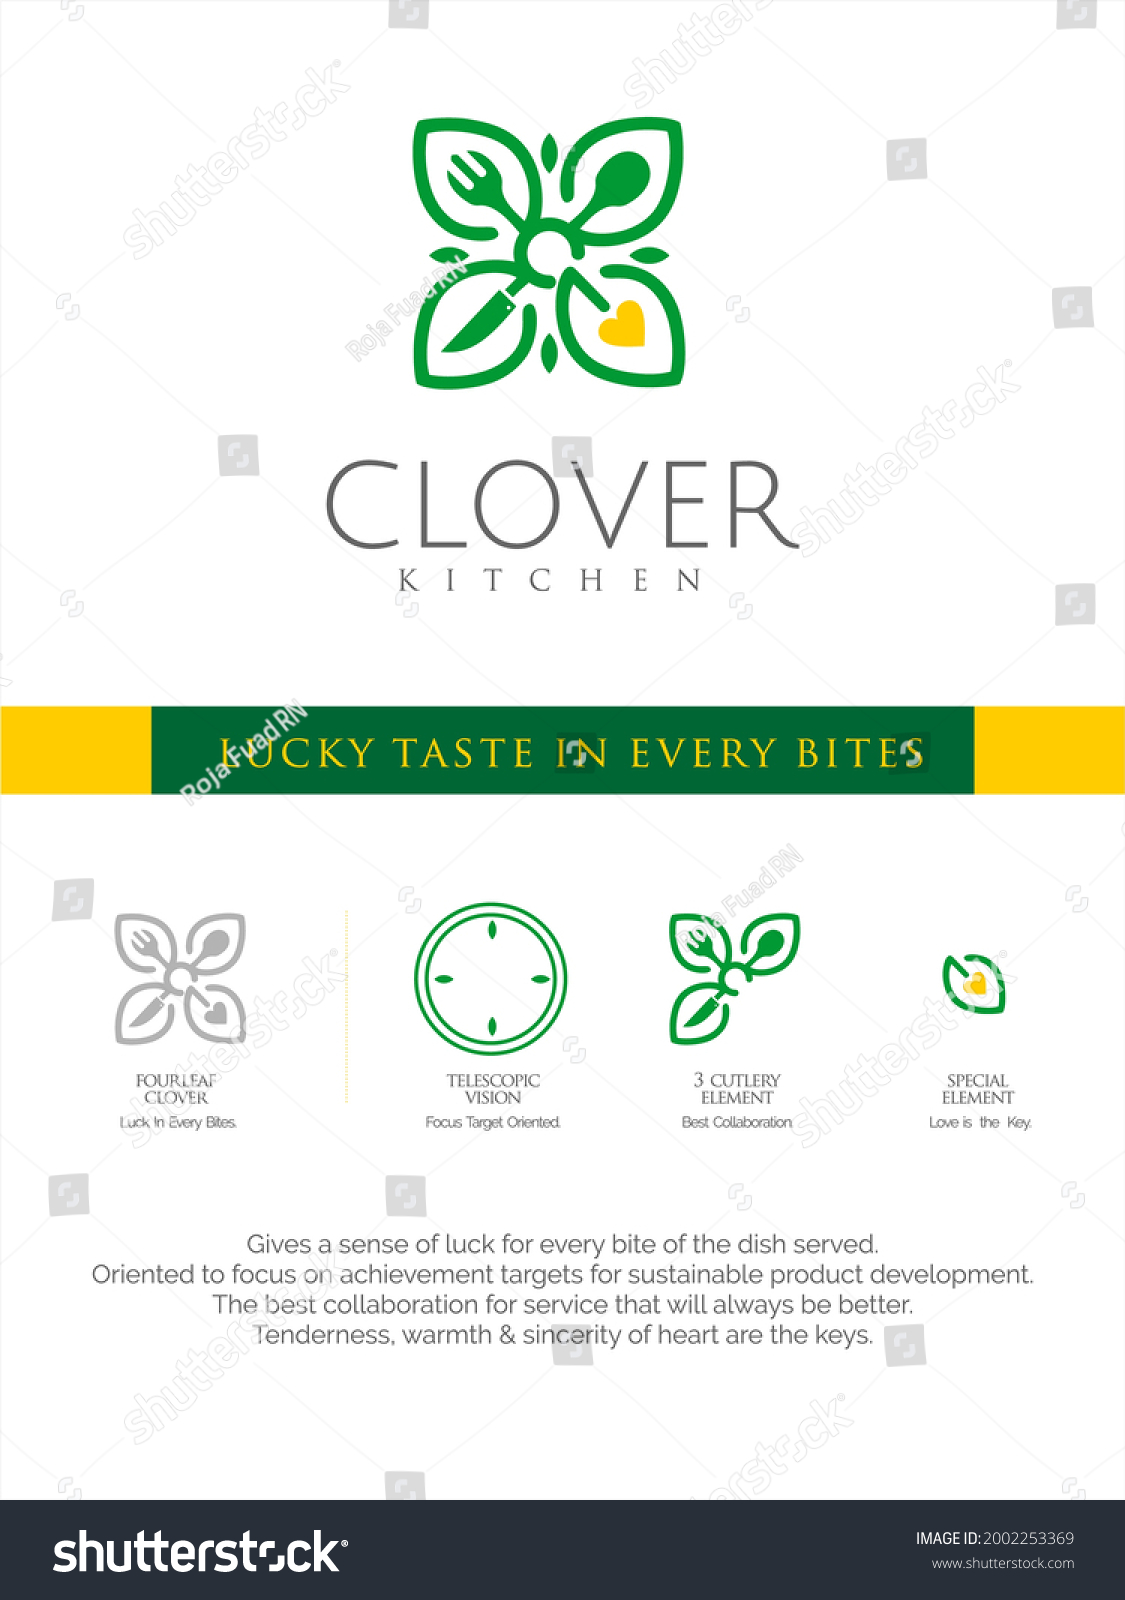 Stock Vector Design Logo For Kitchen Inspired By The Clover Telescopic Vision Culinary Element And Heart For 2002253369 